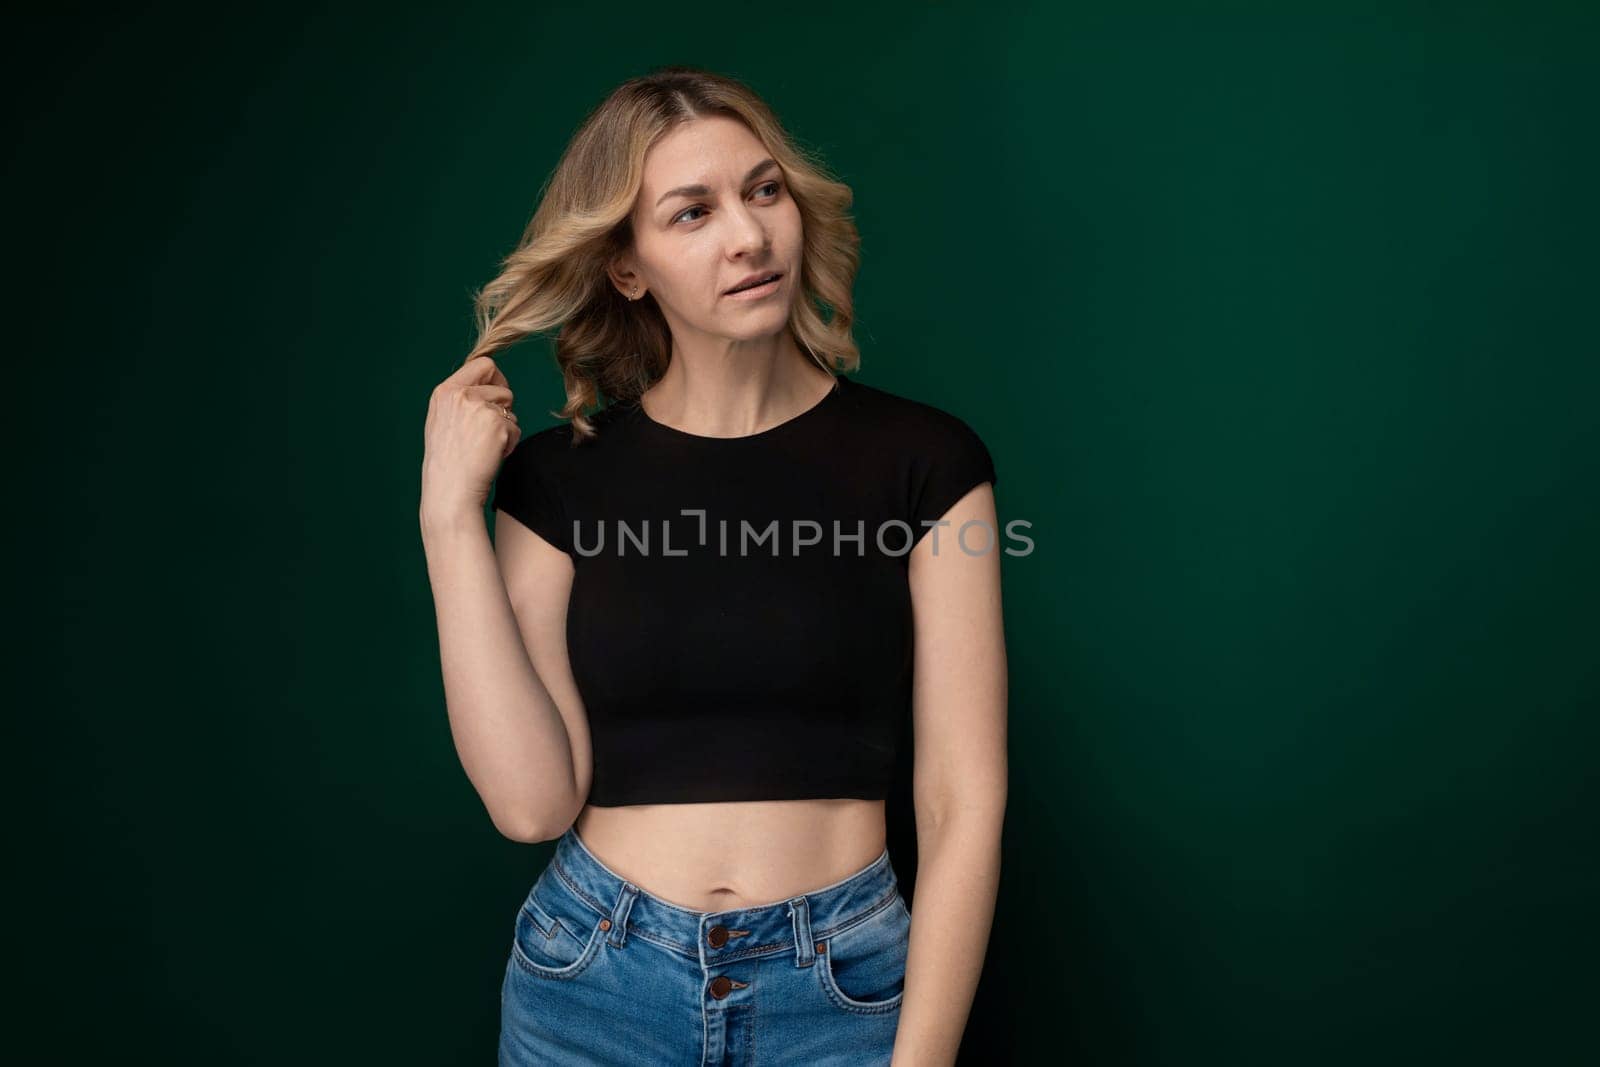 A young woman wearing a black crop top strikes a pose for a photograph, showcasing confidence and style. Her body language exudes self-assuredness as she flaunts her outfit.